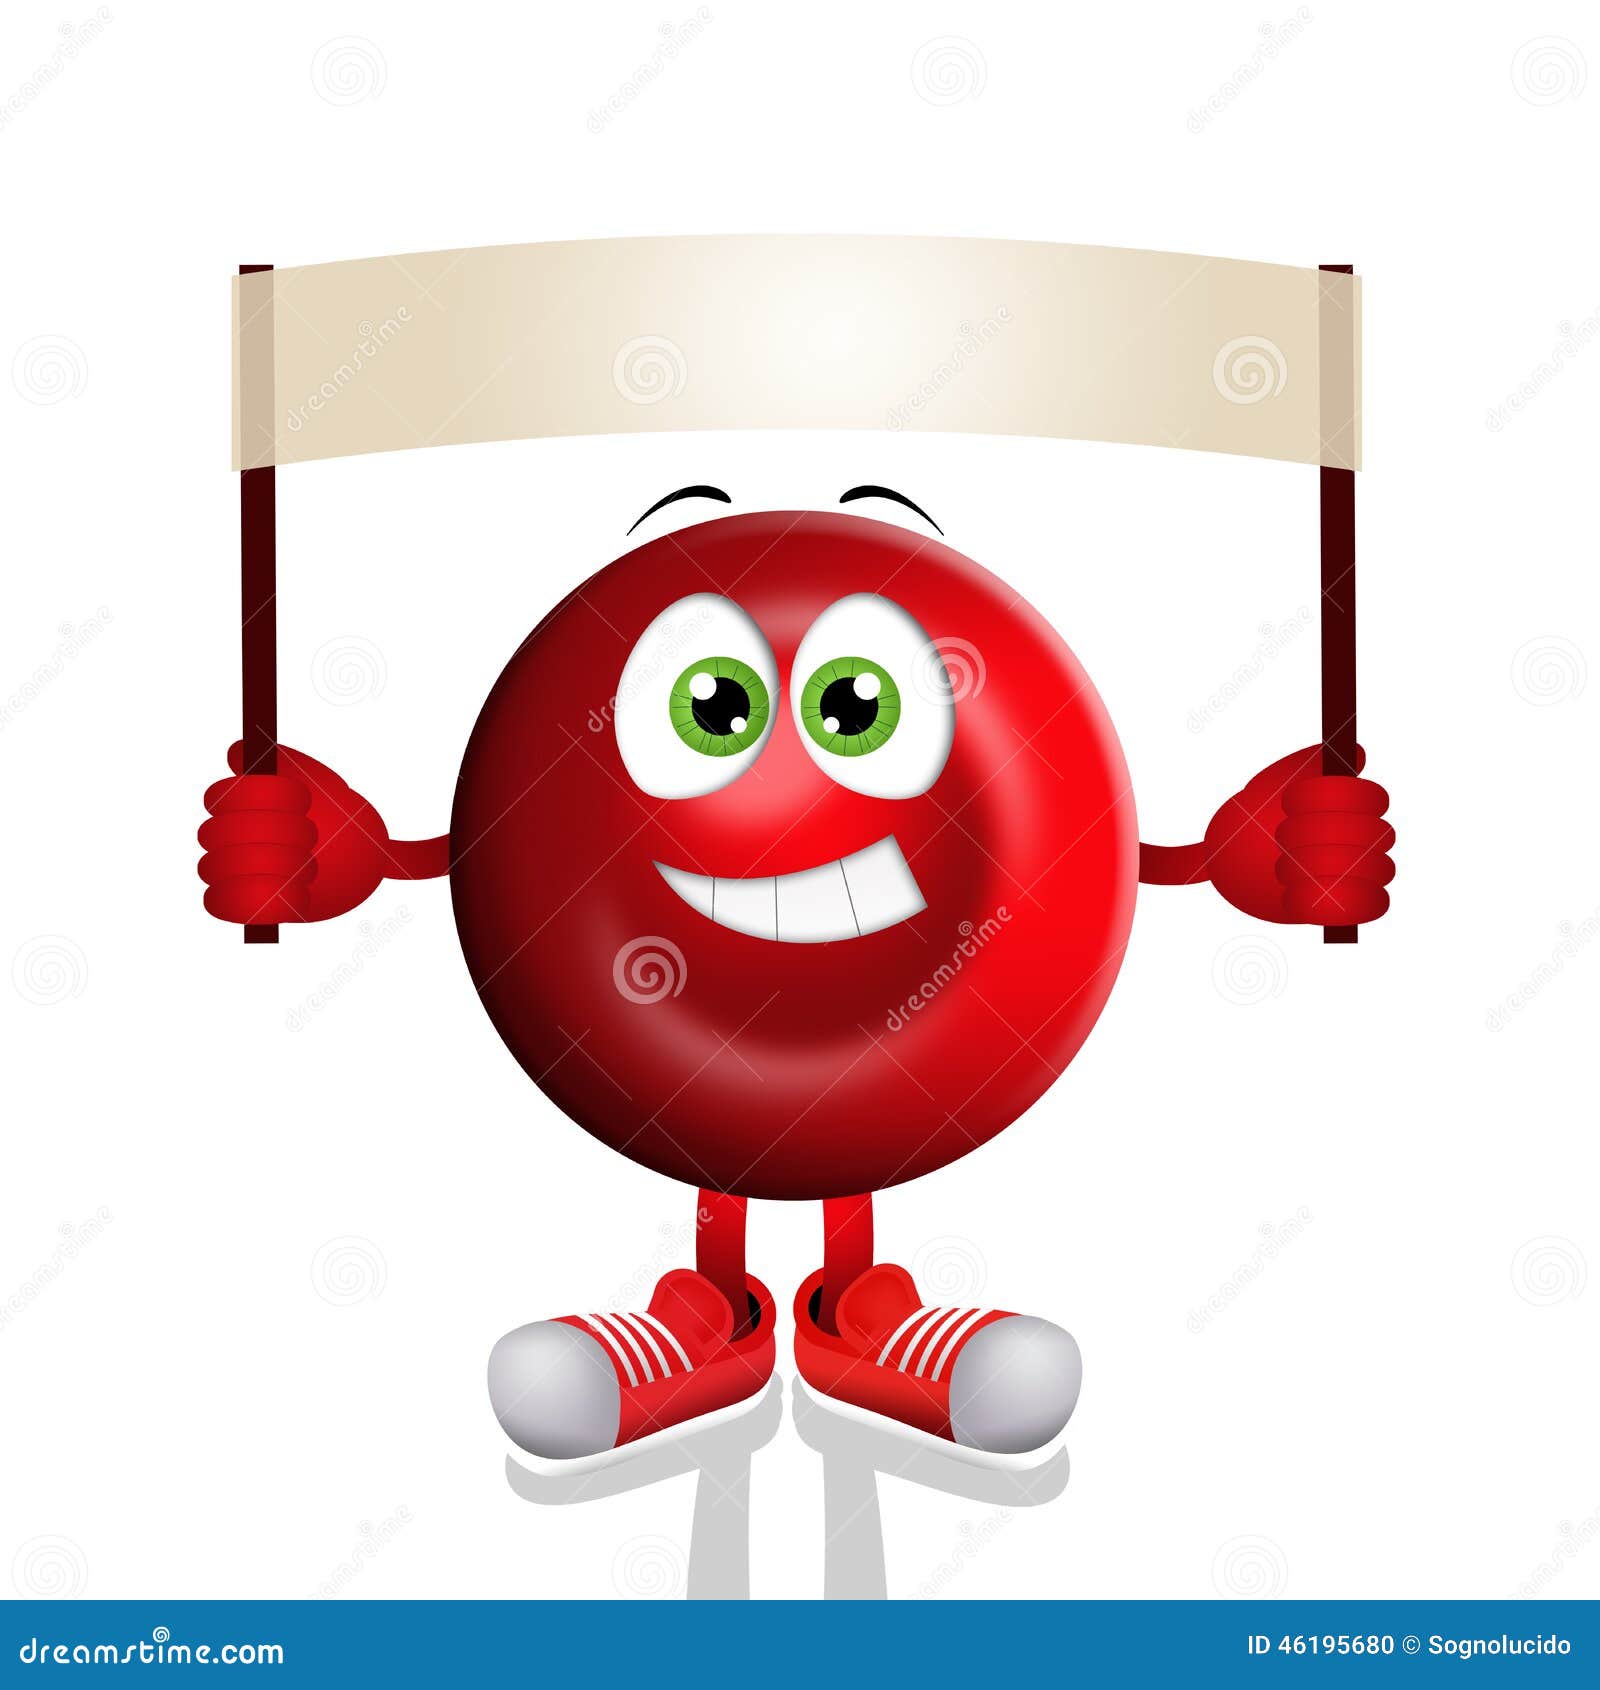 clipart red blood cell - photo #44